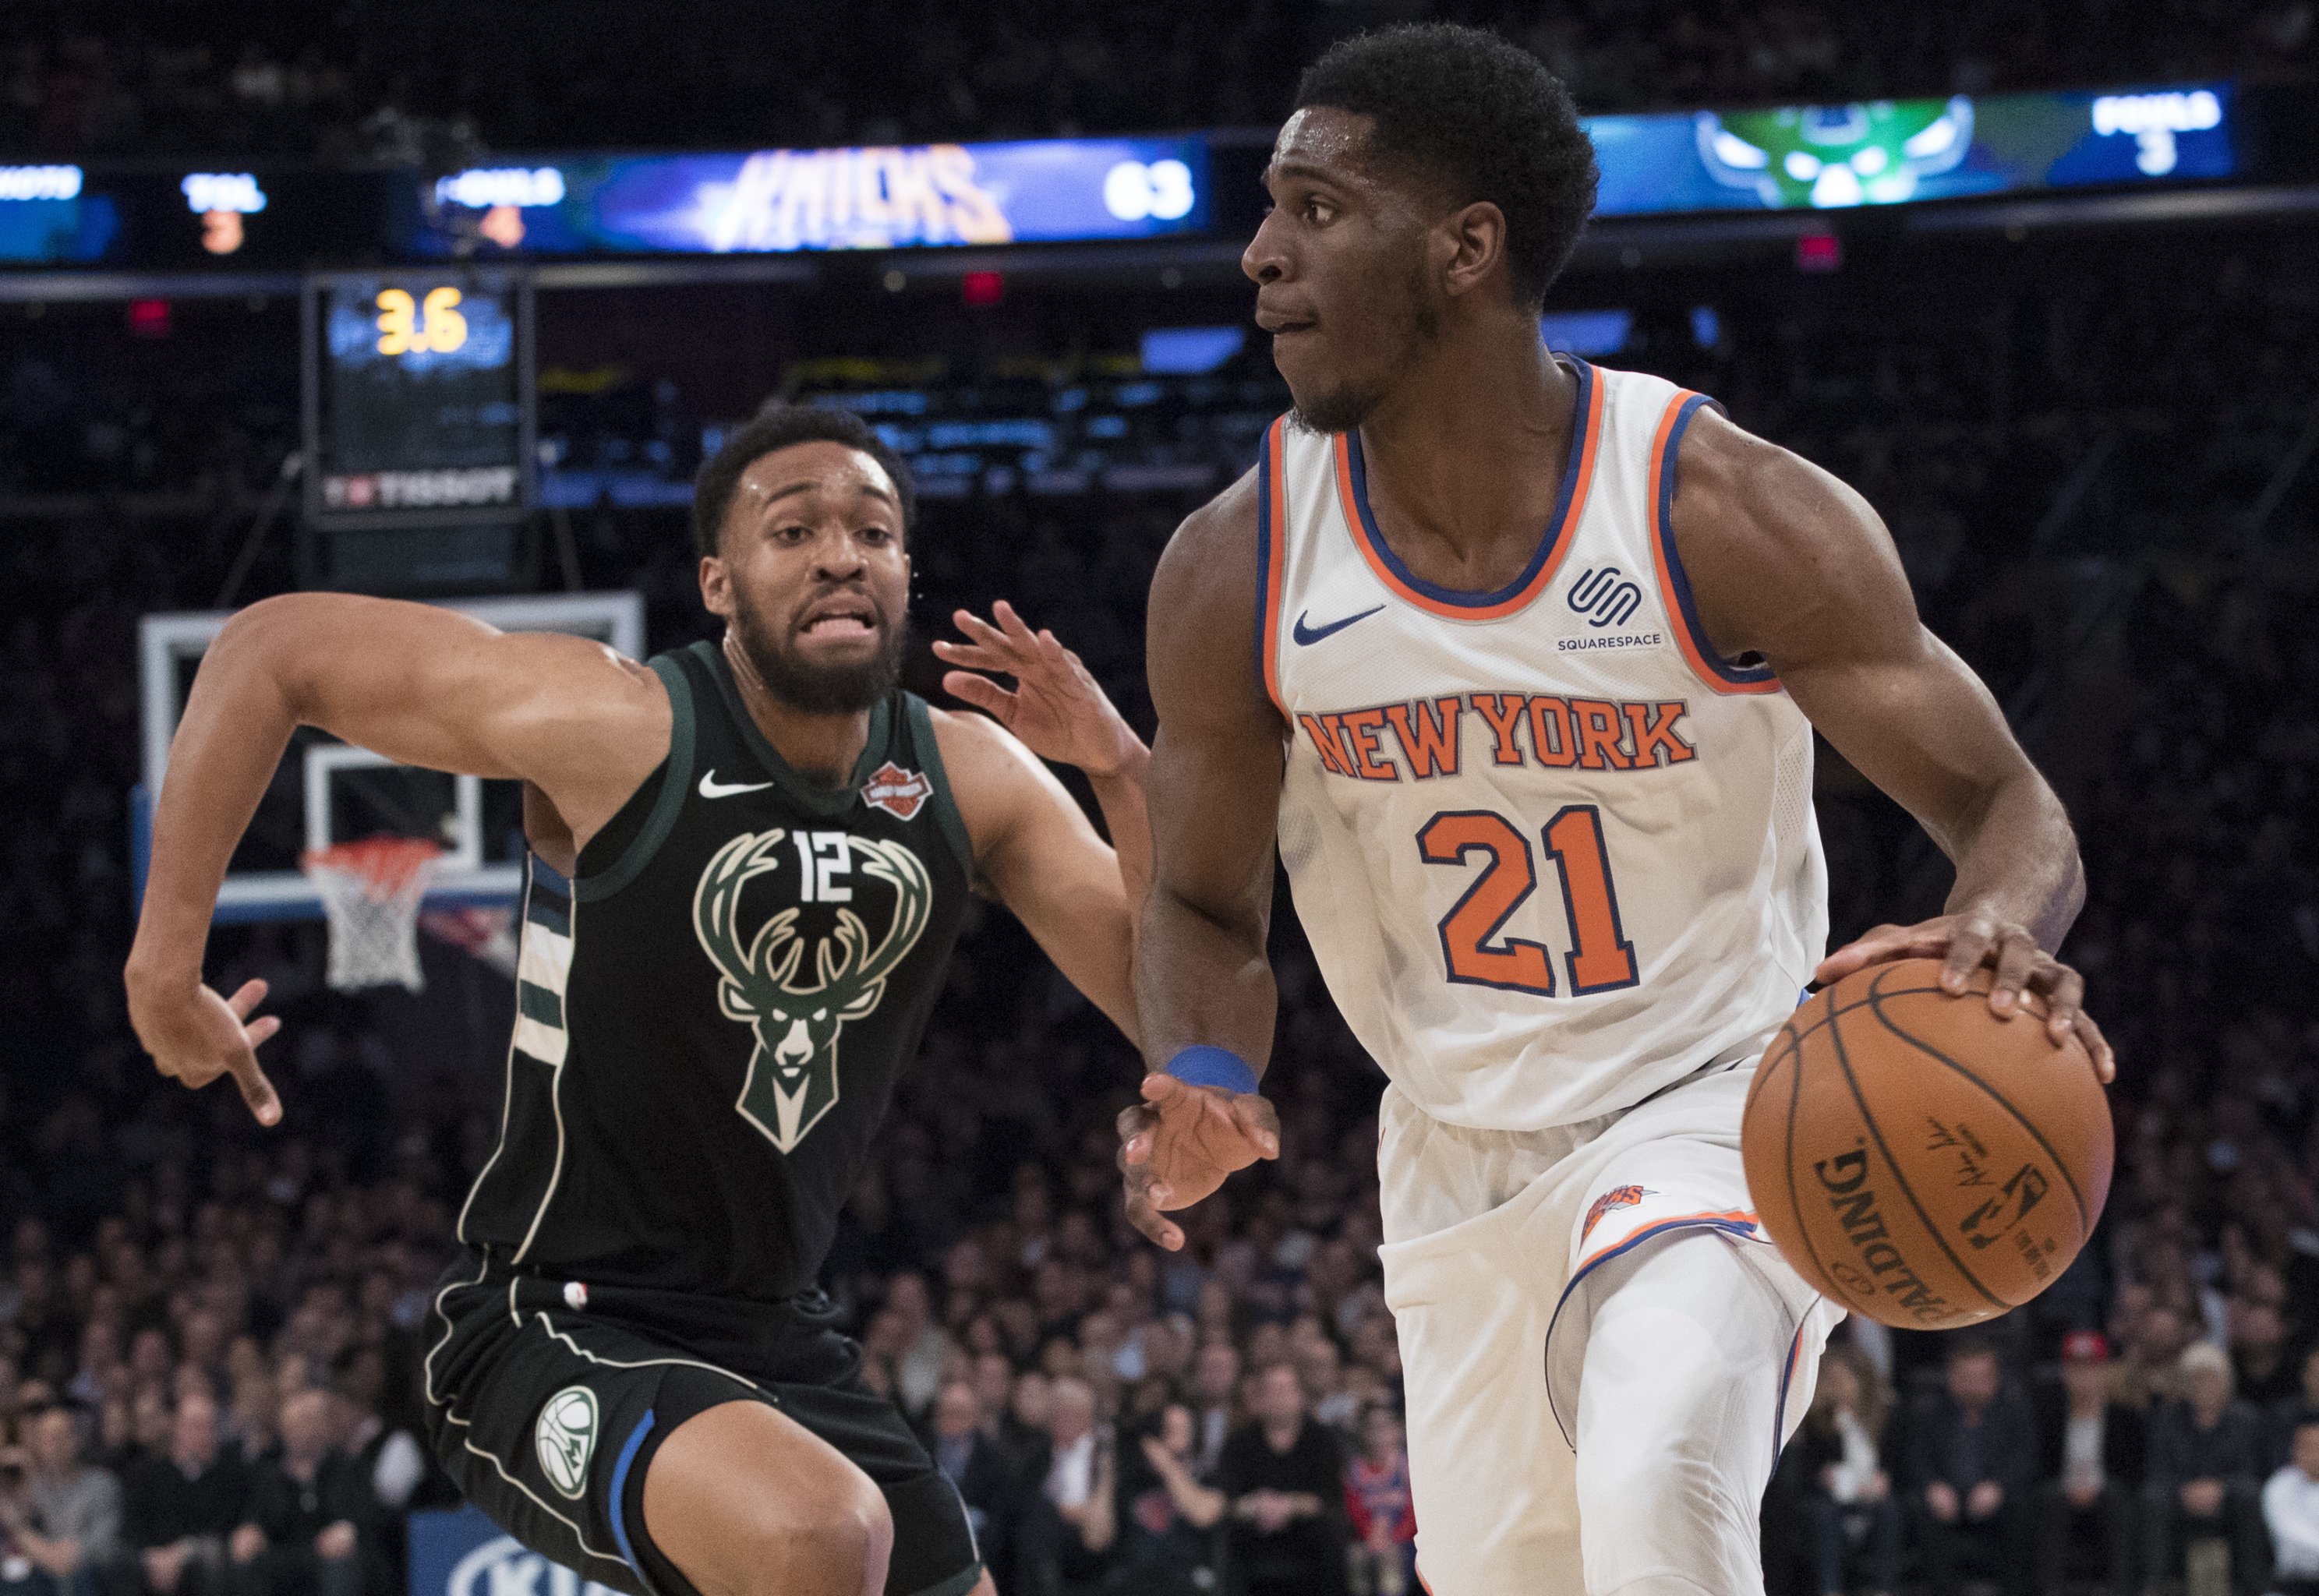 Jabari Parker thinks Barcelona can compete with NBA teams, wants